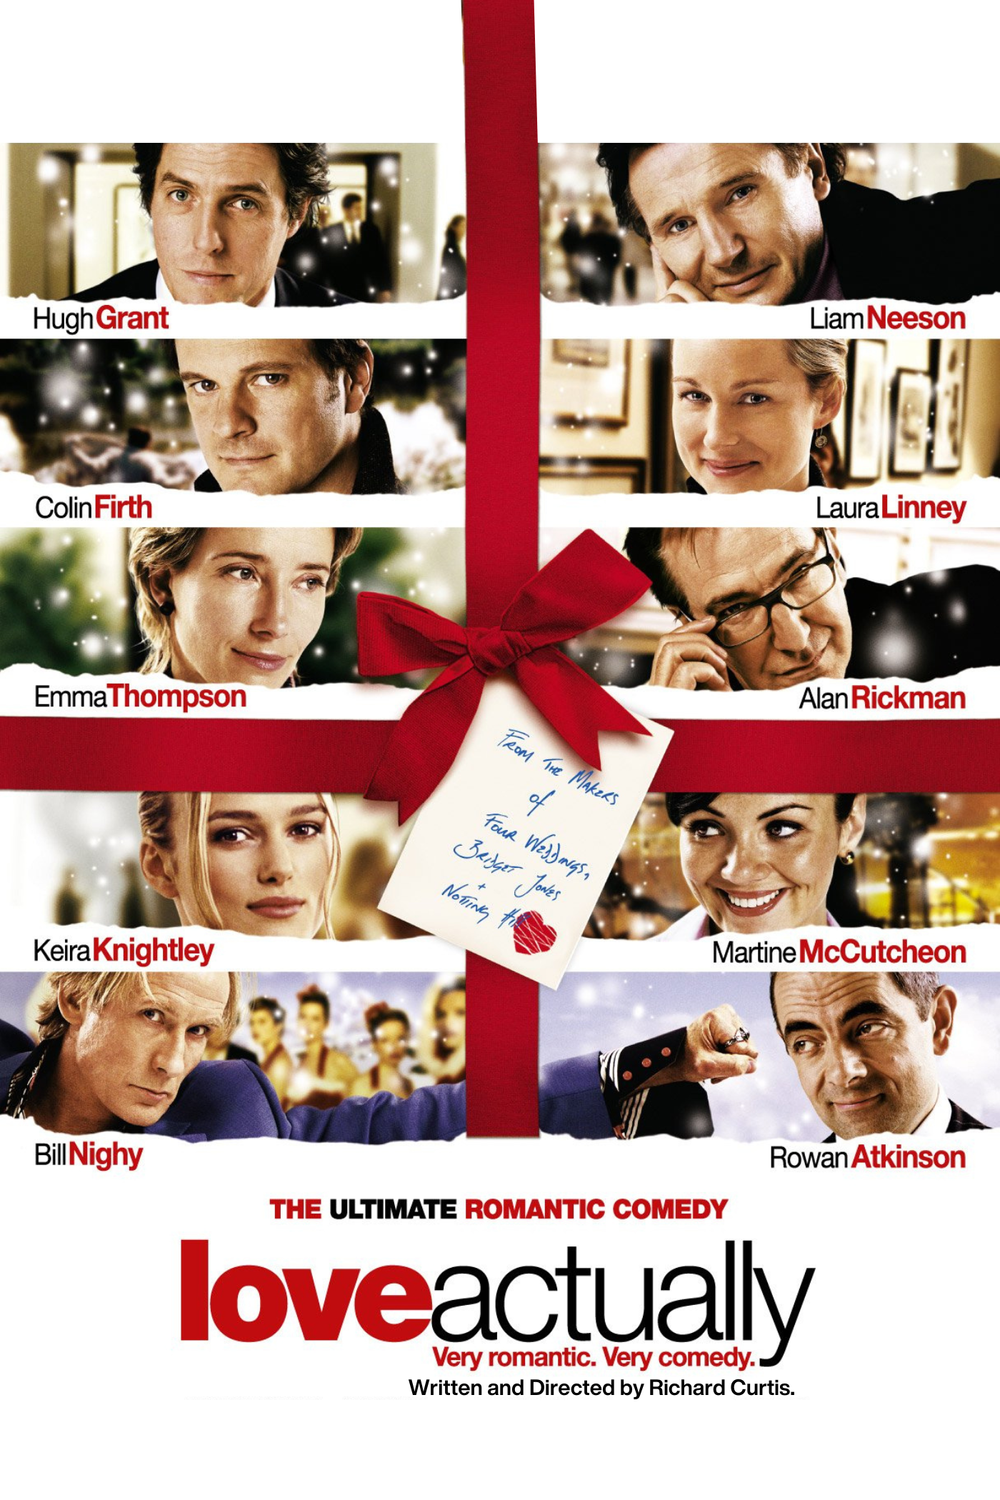 Richard Curtis, Love, Actually Poster.png